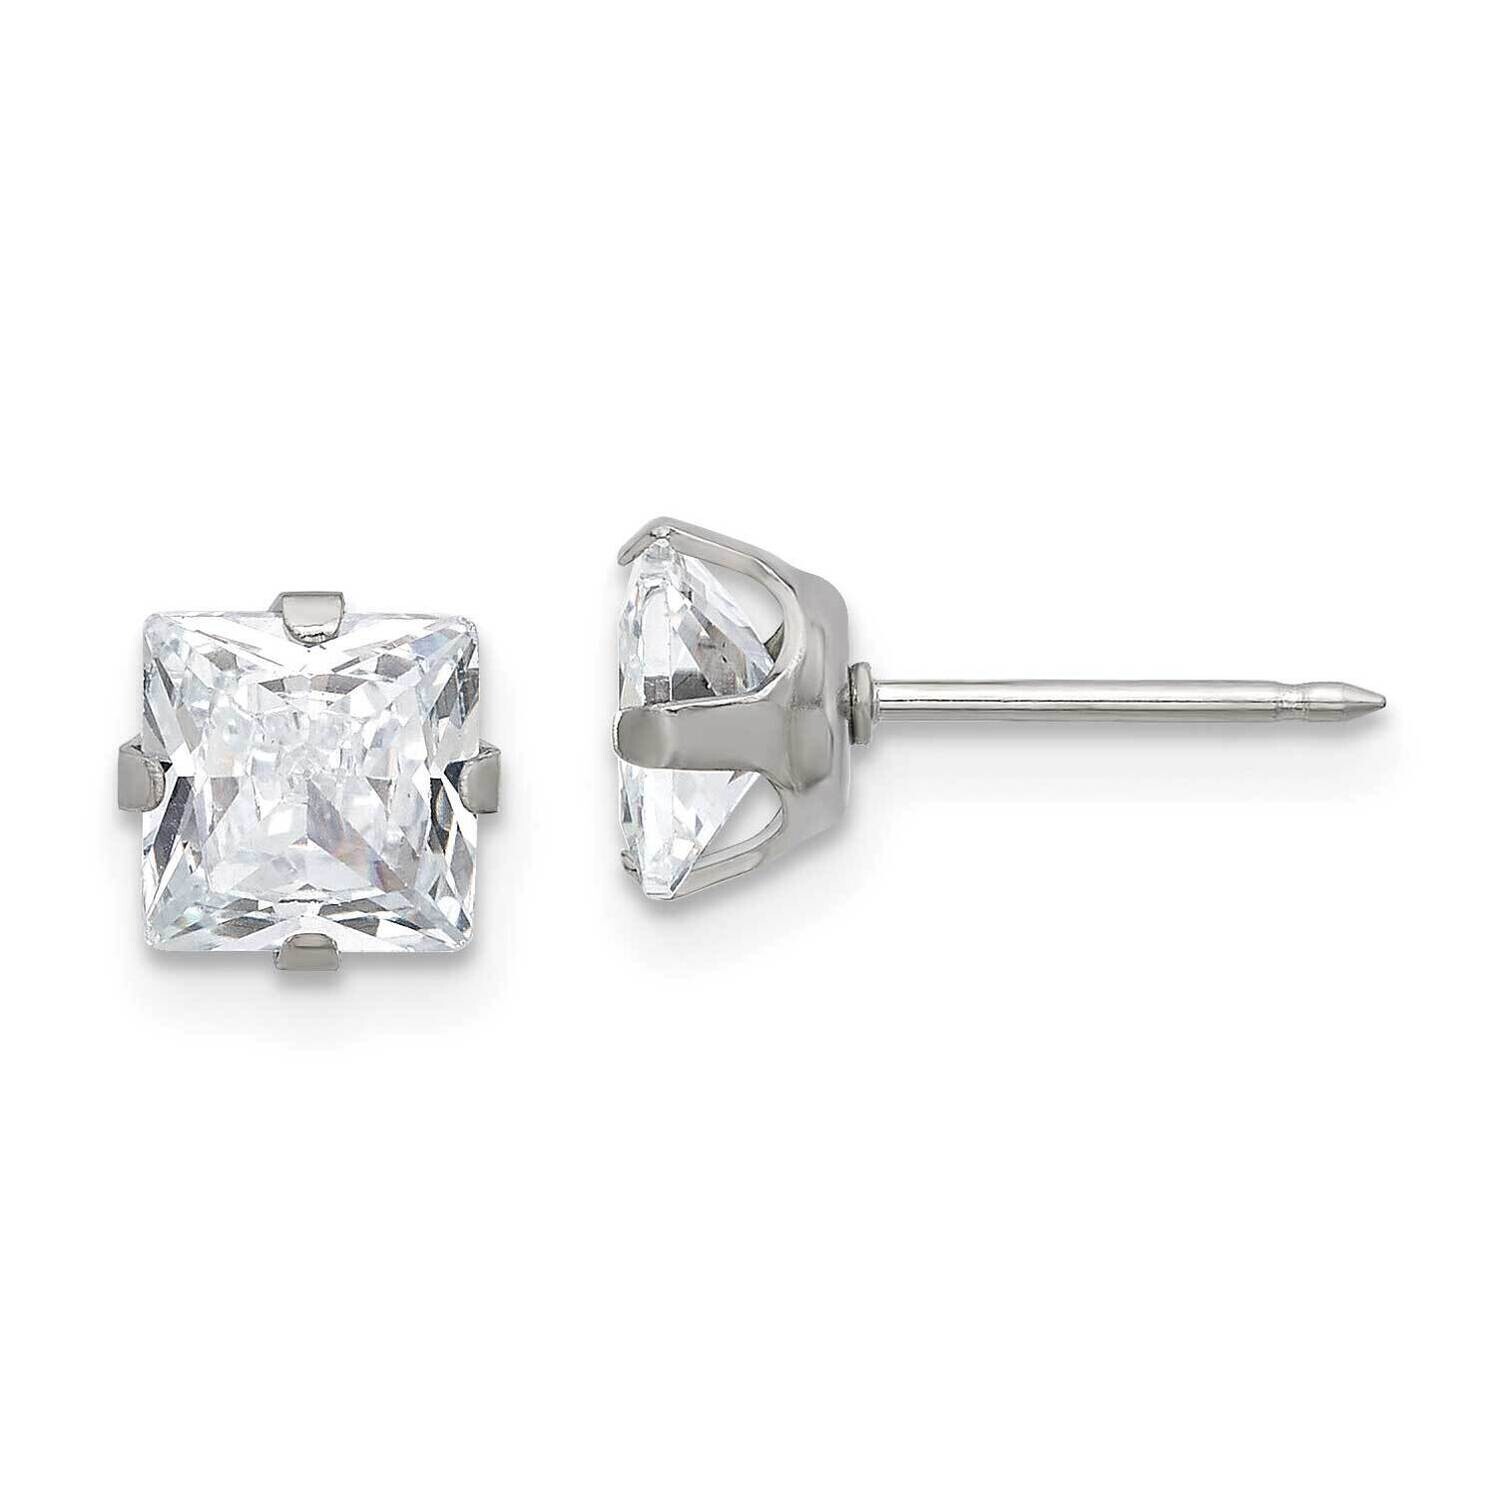 Inverness 6mm Square CZ Post Earrings Stainless Steel 650E